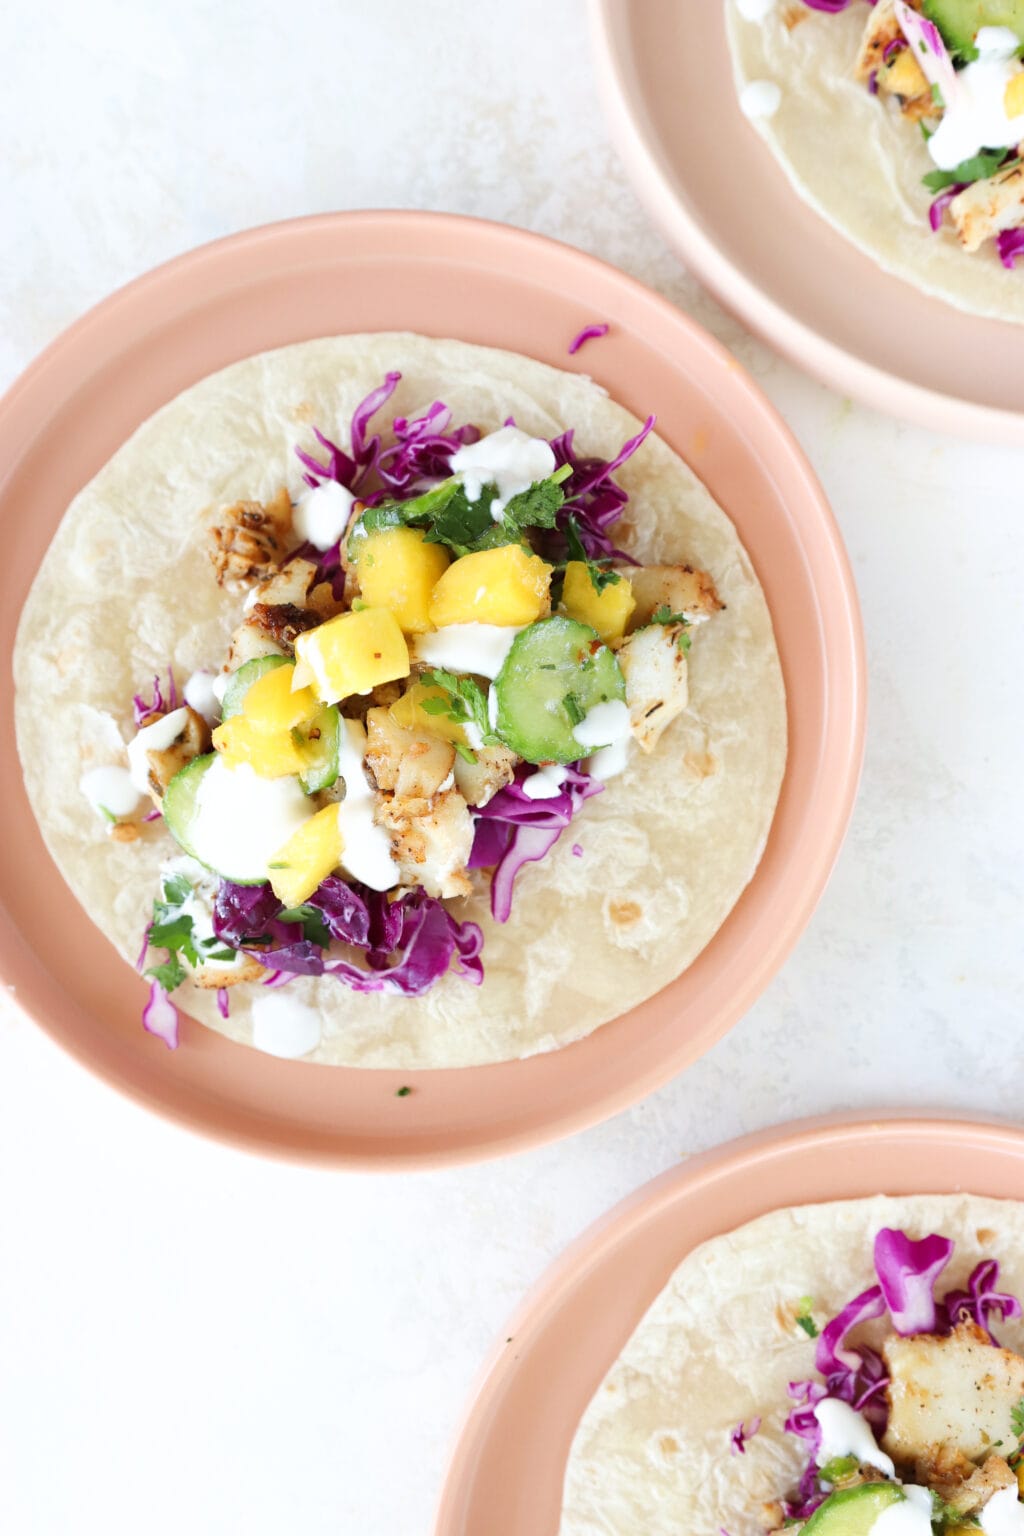 3 pink plates each have a tortilla with cajun fish tacos in them. Two of the plates are cut off in the right-hand upper and lower corner. The plate in the middle displays all the ingredients in the taco: purple cabbage, cilantro, mango, cajun cod, and lime crema. 